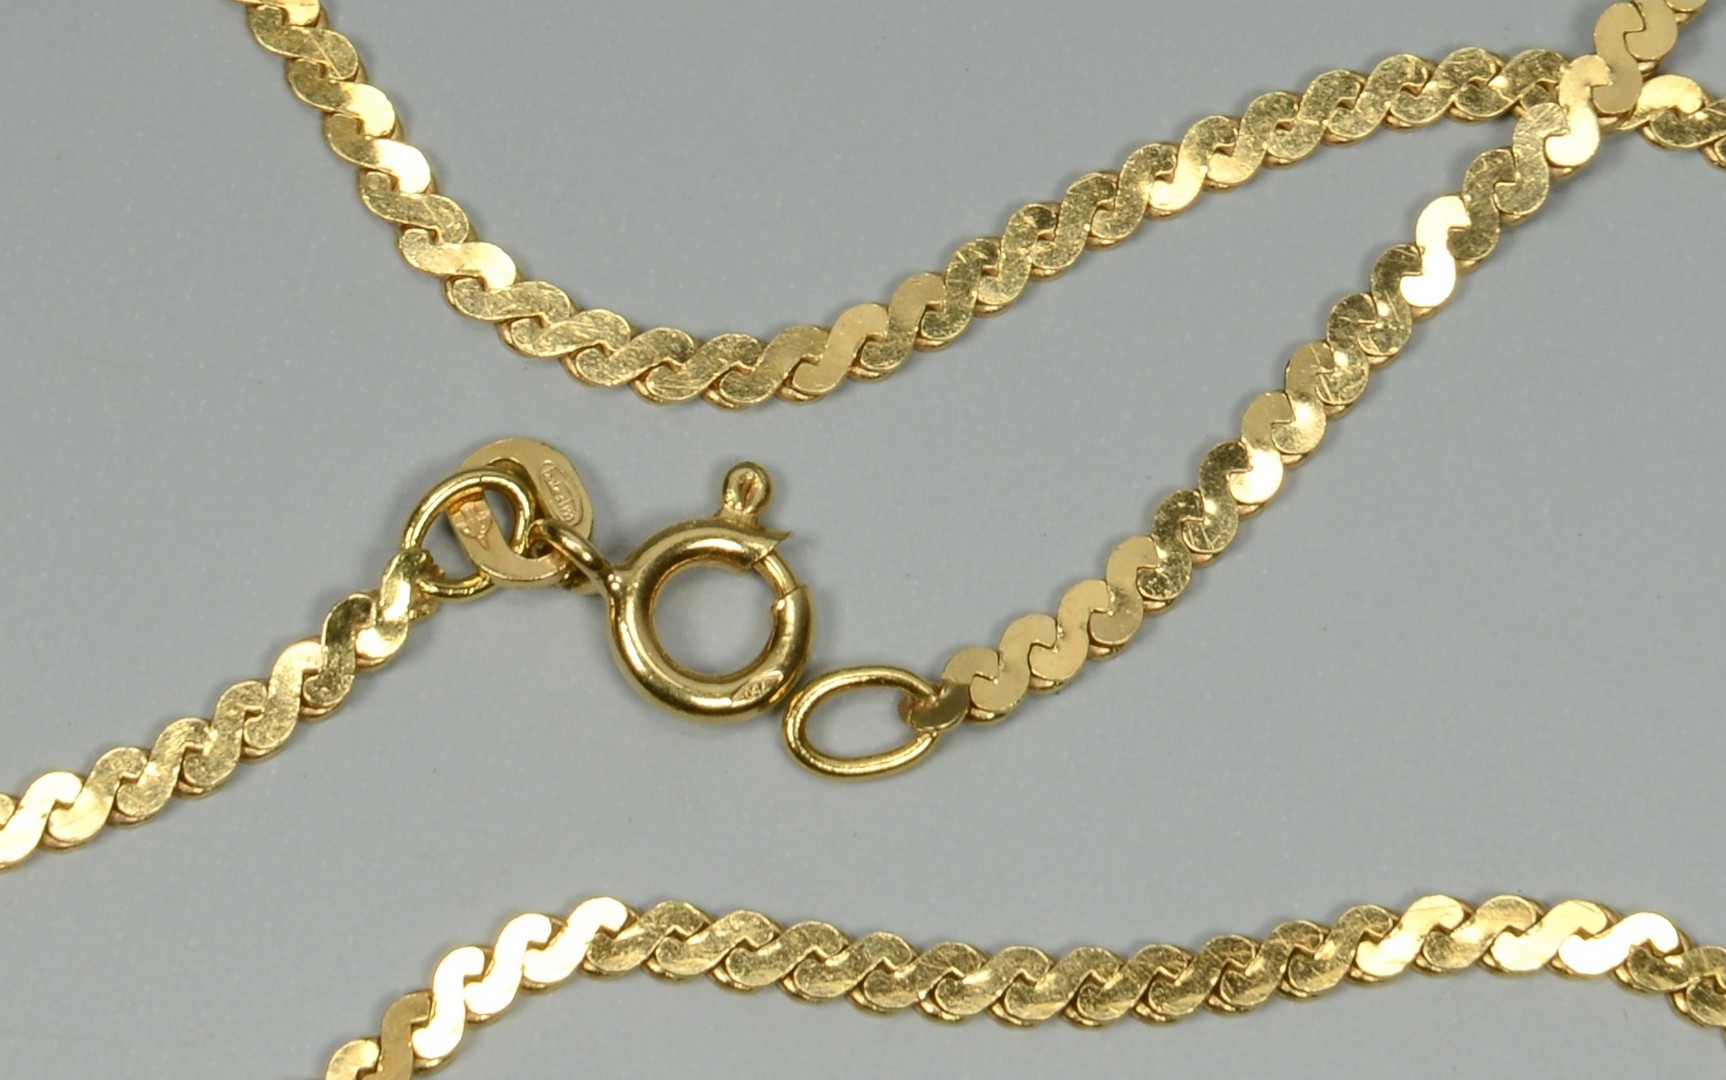 Lot 3088060: Two 18k Gold Chain Necklaces